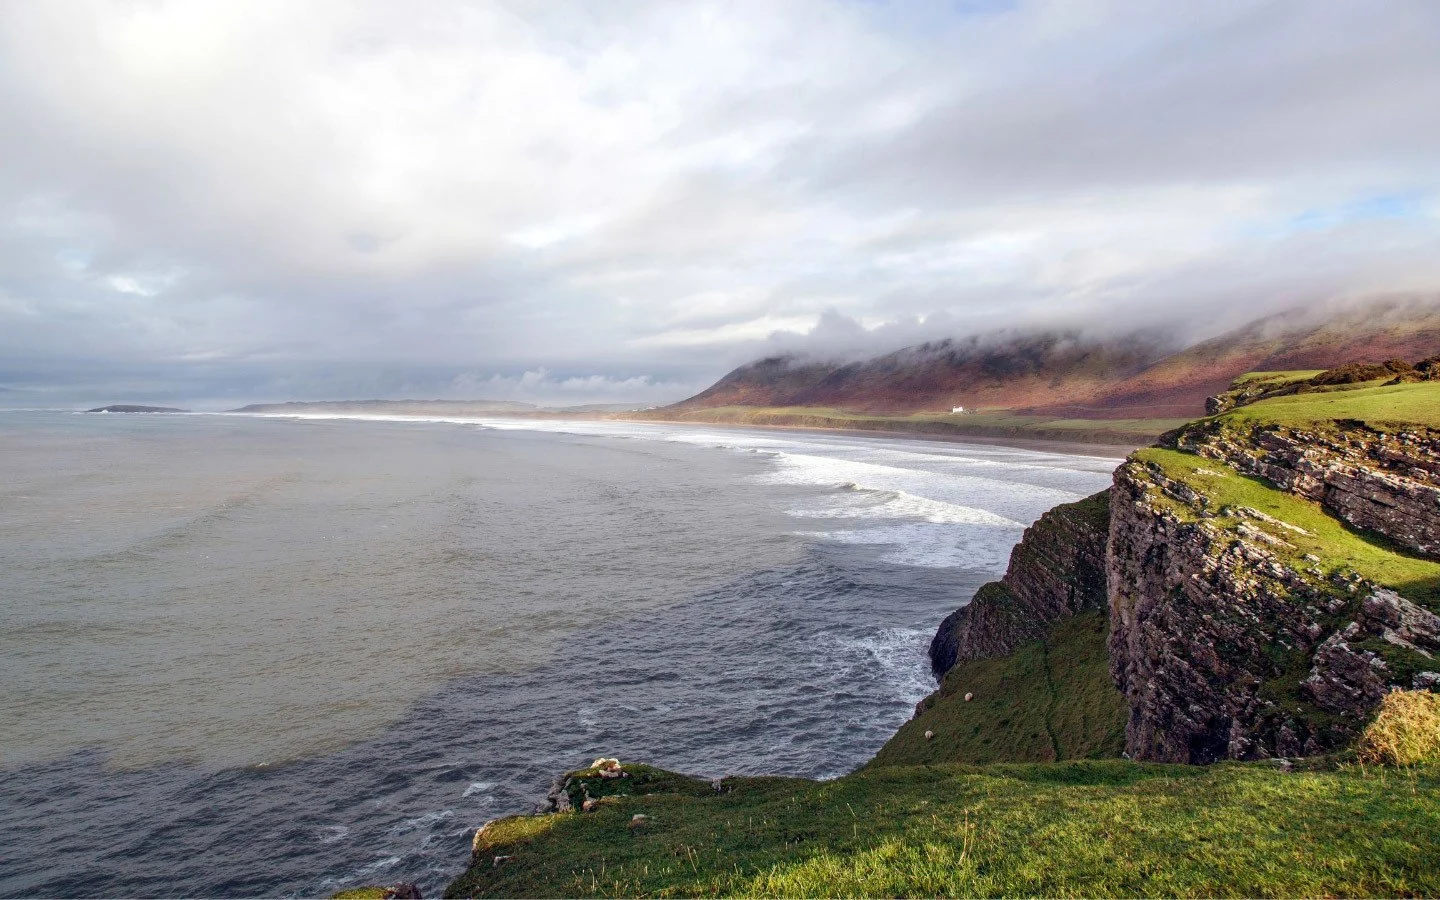 Rhossili Bay in the Gower Peninsula in South Wales